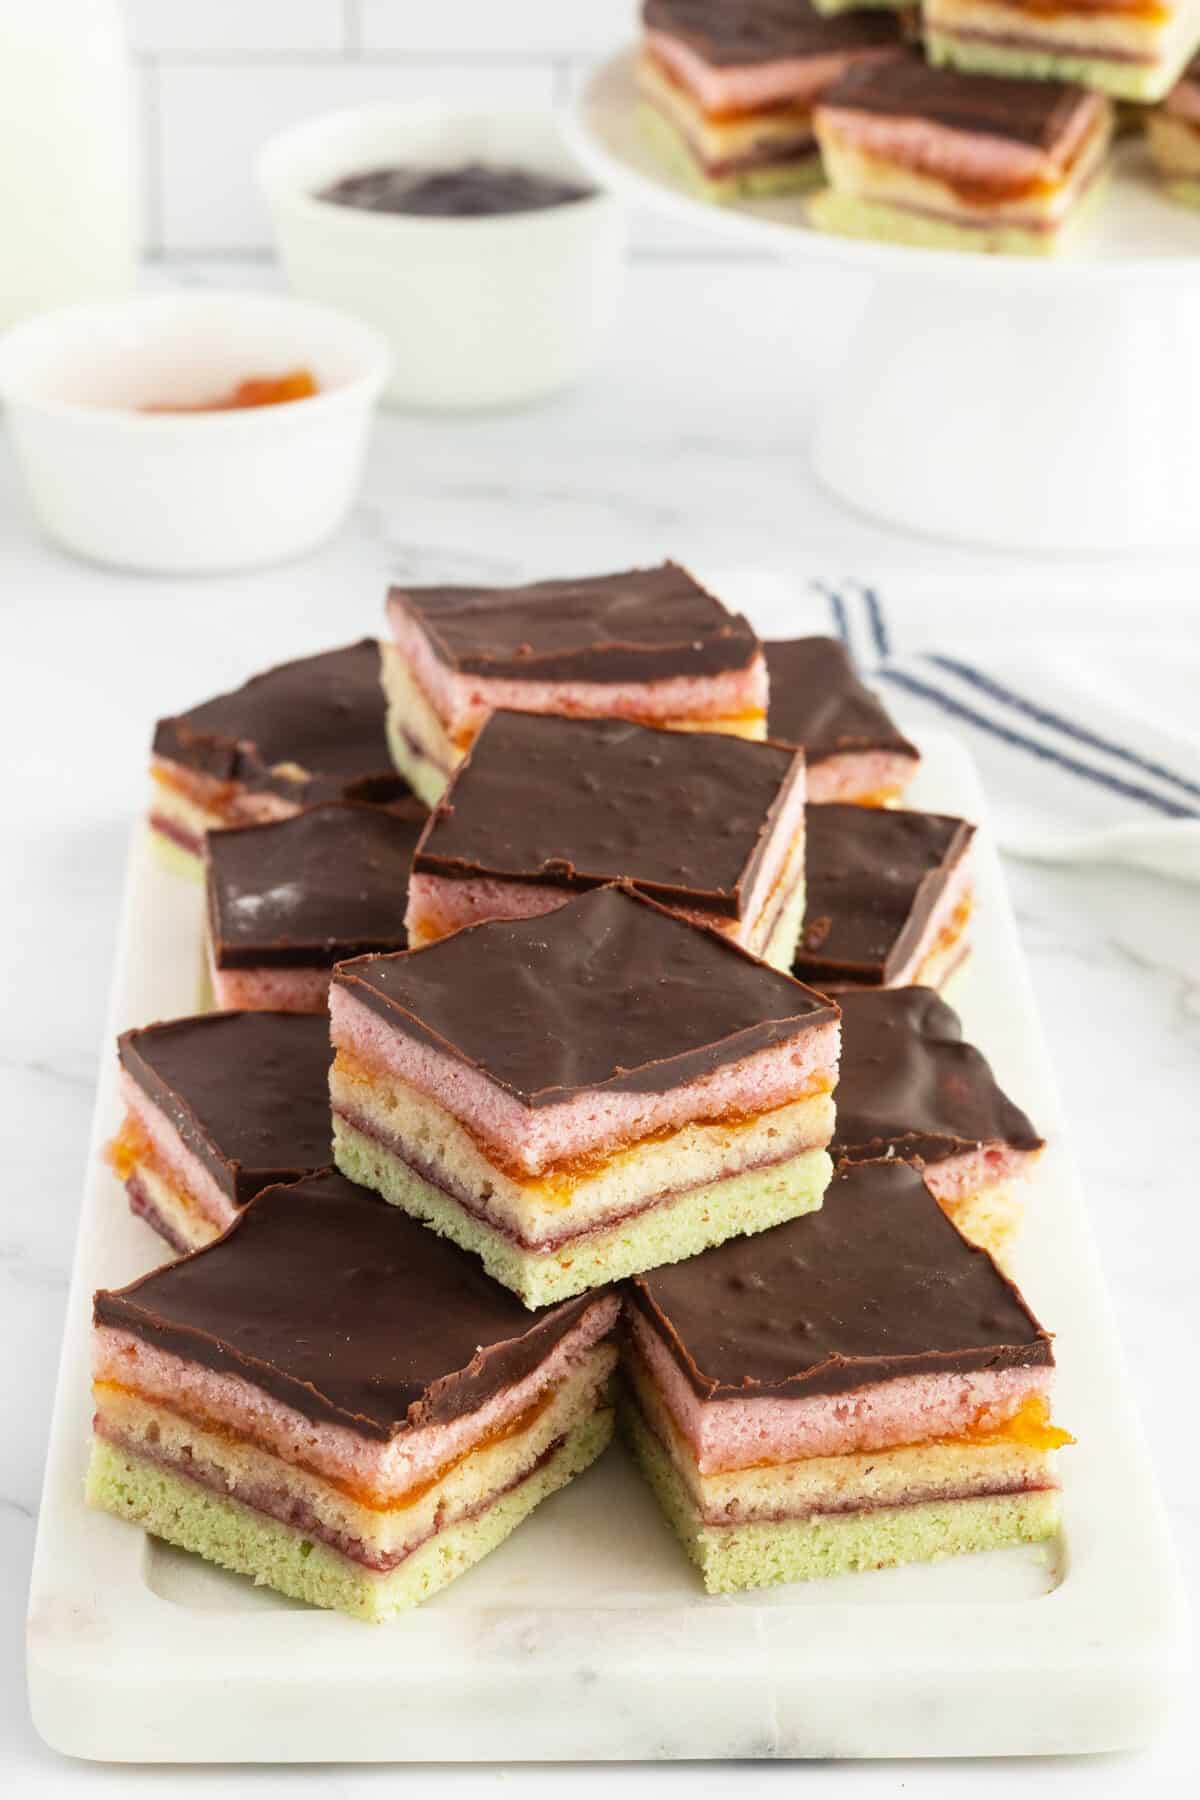 Rainbow Cookies piled on square plate